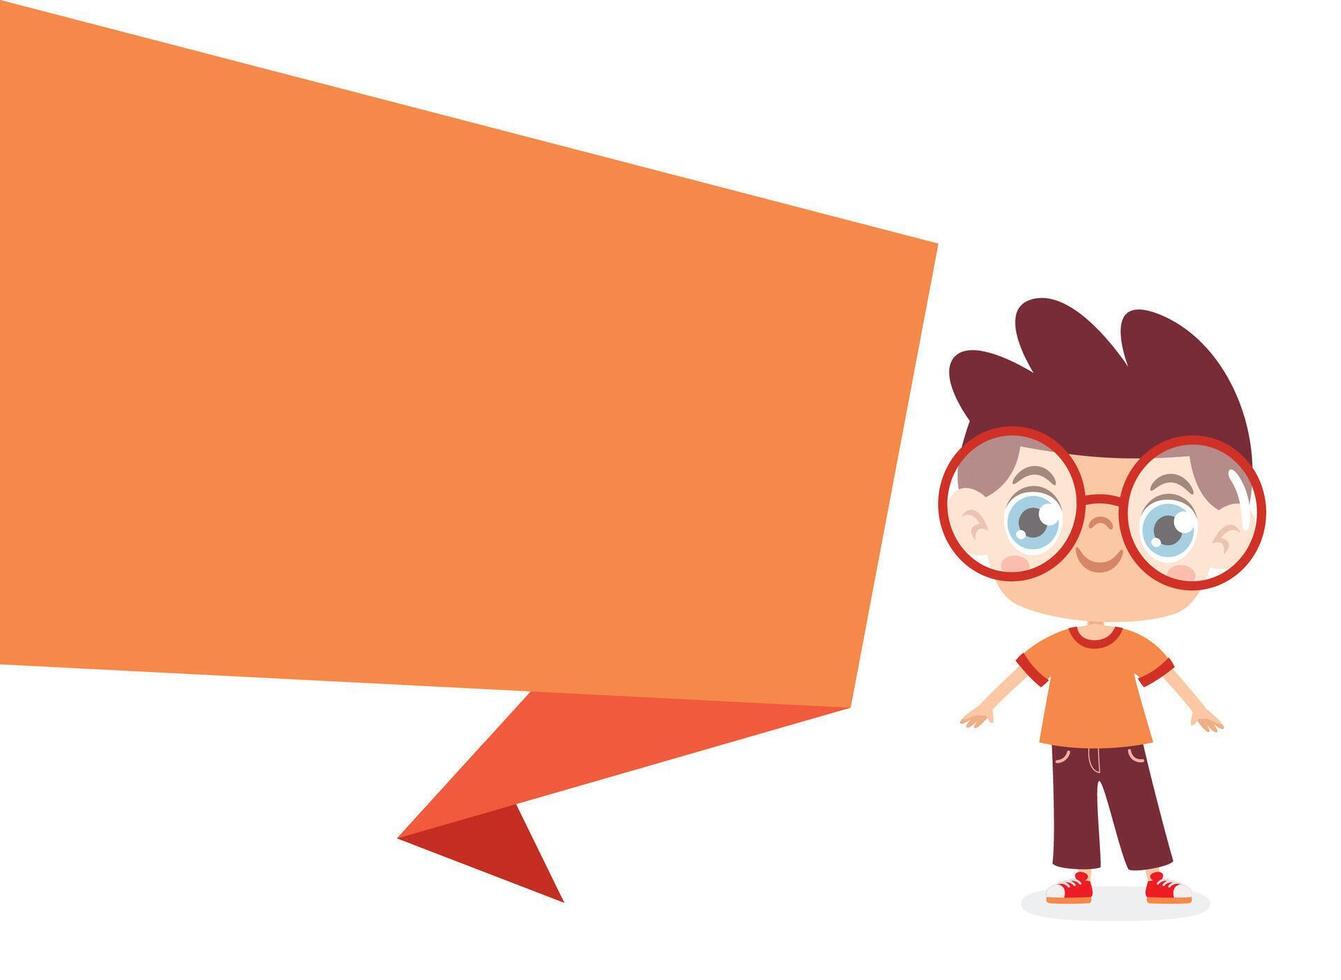 Kid Posing With Origami Speech Bubble vector